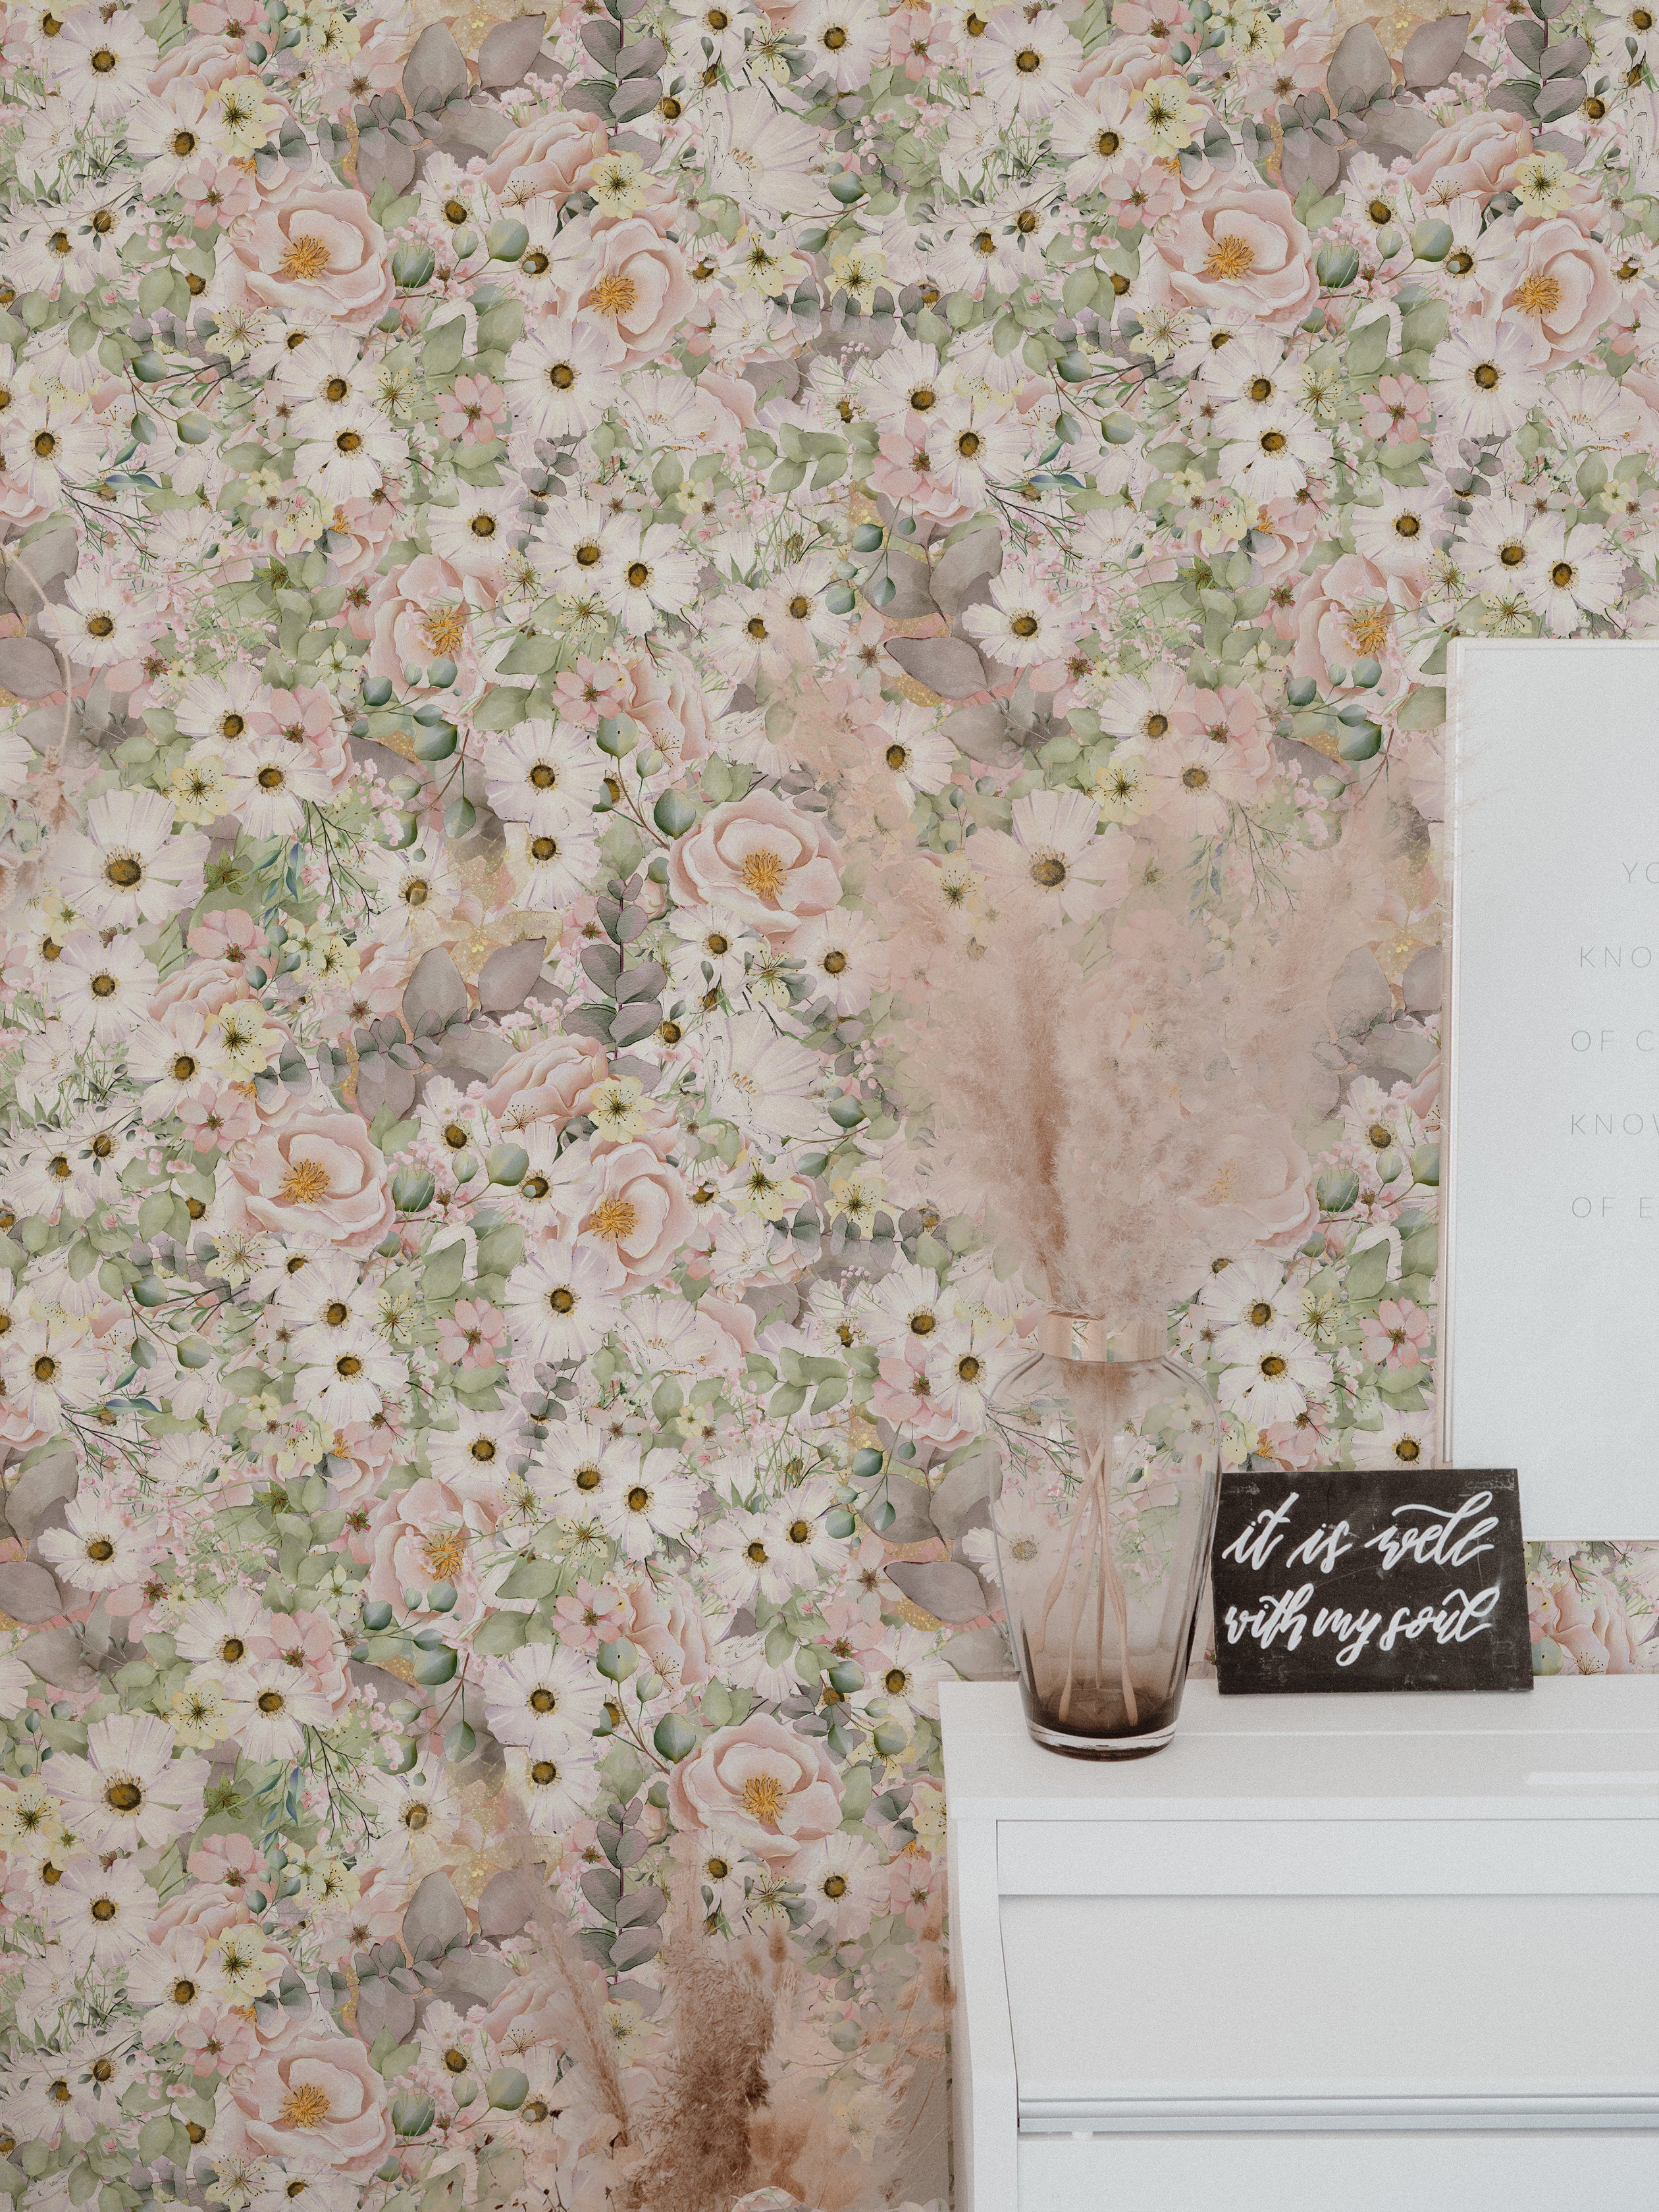 A stylish interior wall decorated with Pink Fleur Wallpaper, which showcases delicate pink and white flowers with touches of green leaves. The wallpaper lends a fresh, botanical vibe to the space, complemented by modern decor elements